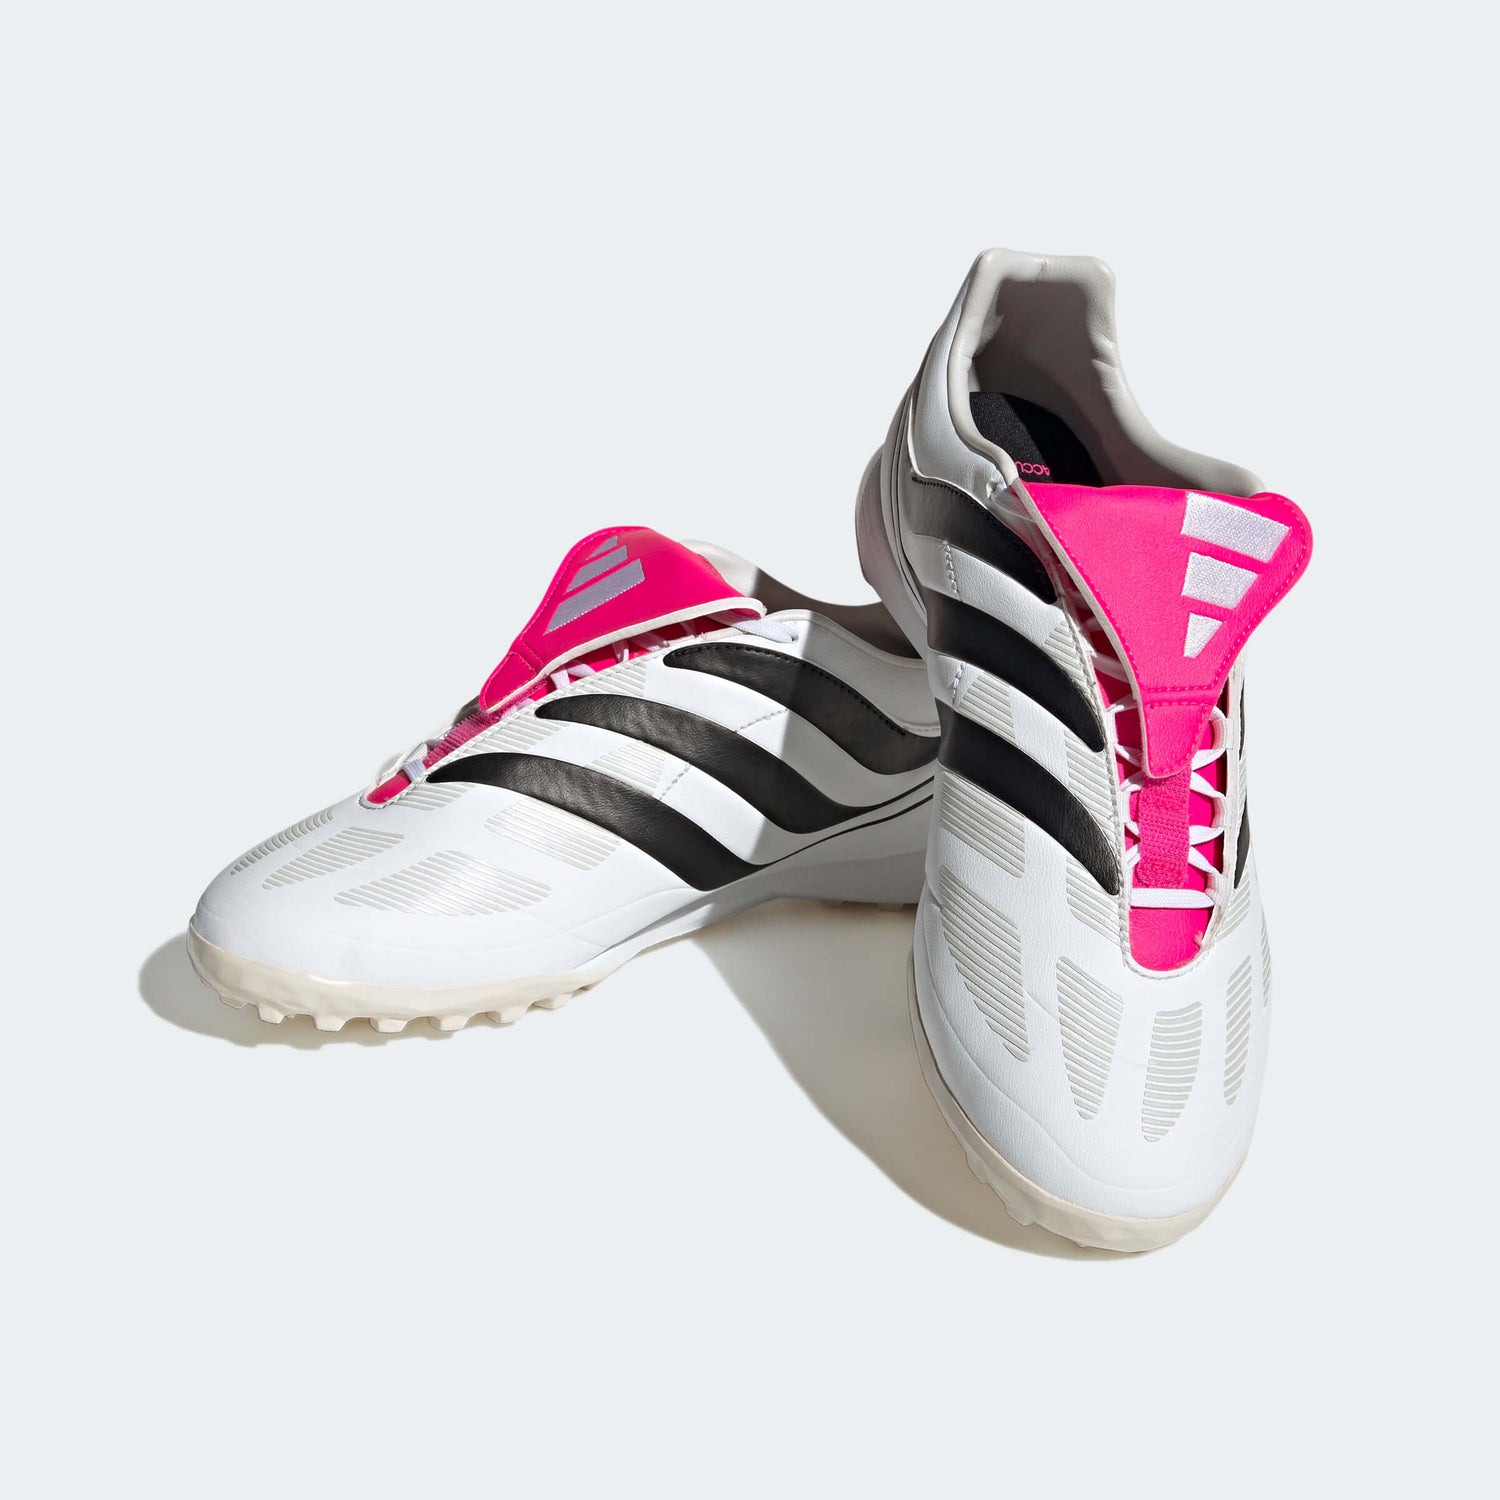 adidas Predator Precision.3 Turf - Predator Archive Pack (SP23) (Pair - Front Lateral)